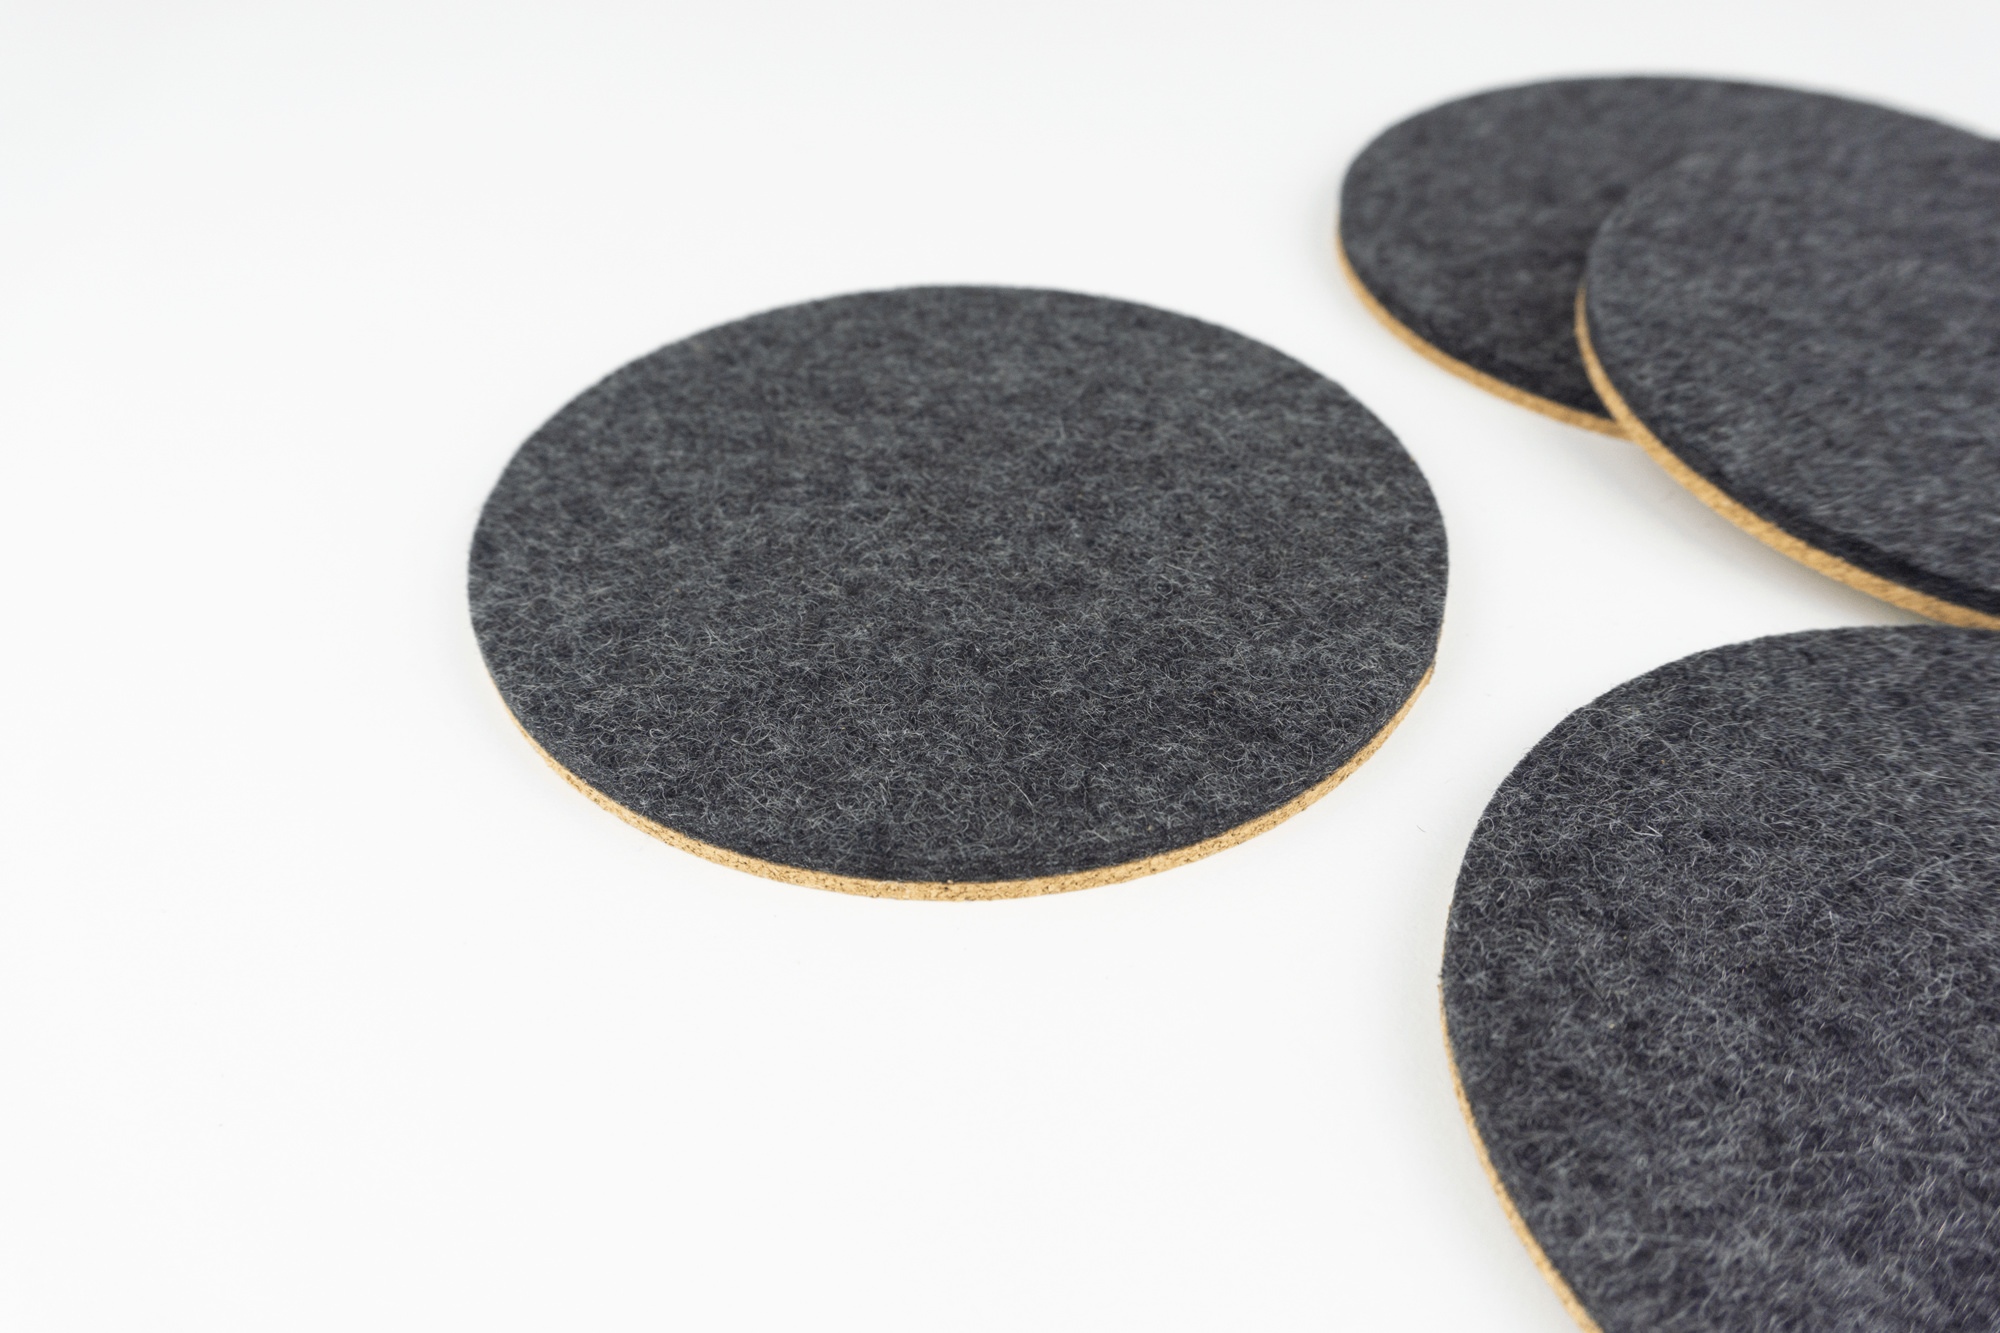 Our black wool and cork circular coasters shown spread out on a white coffee table.